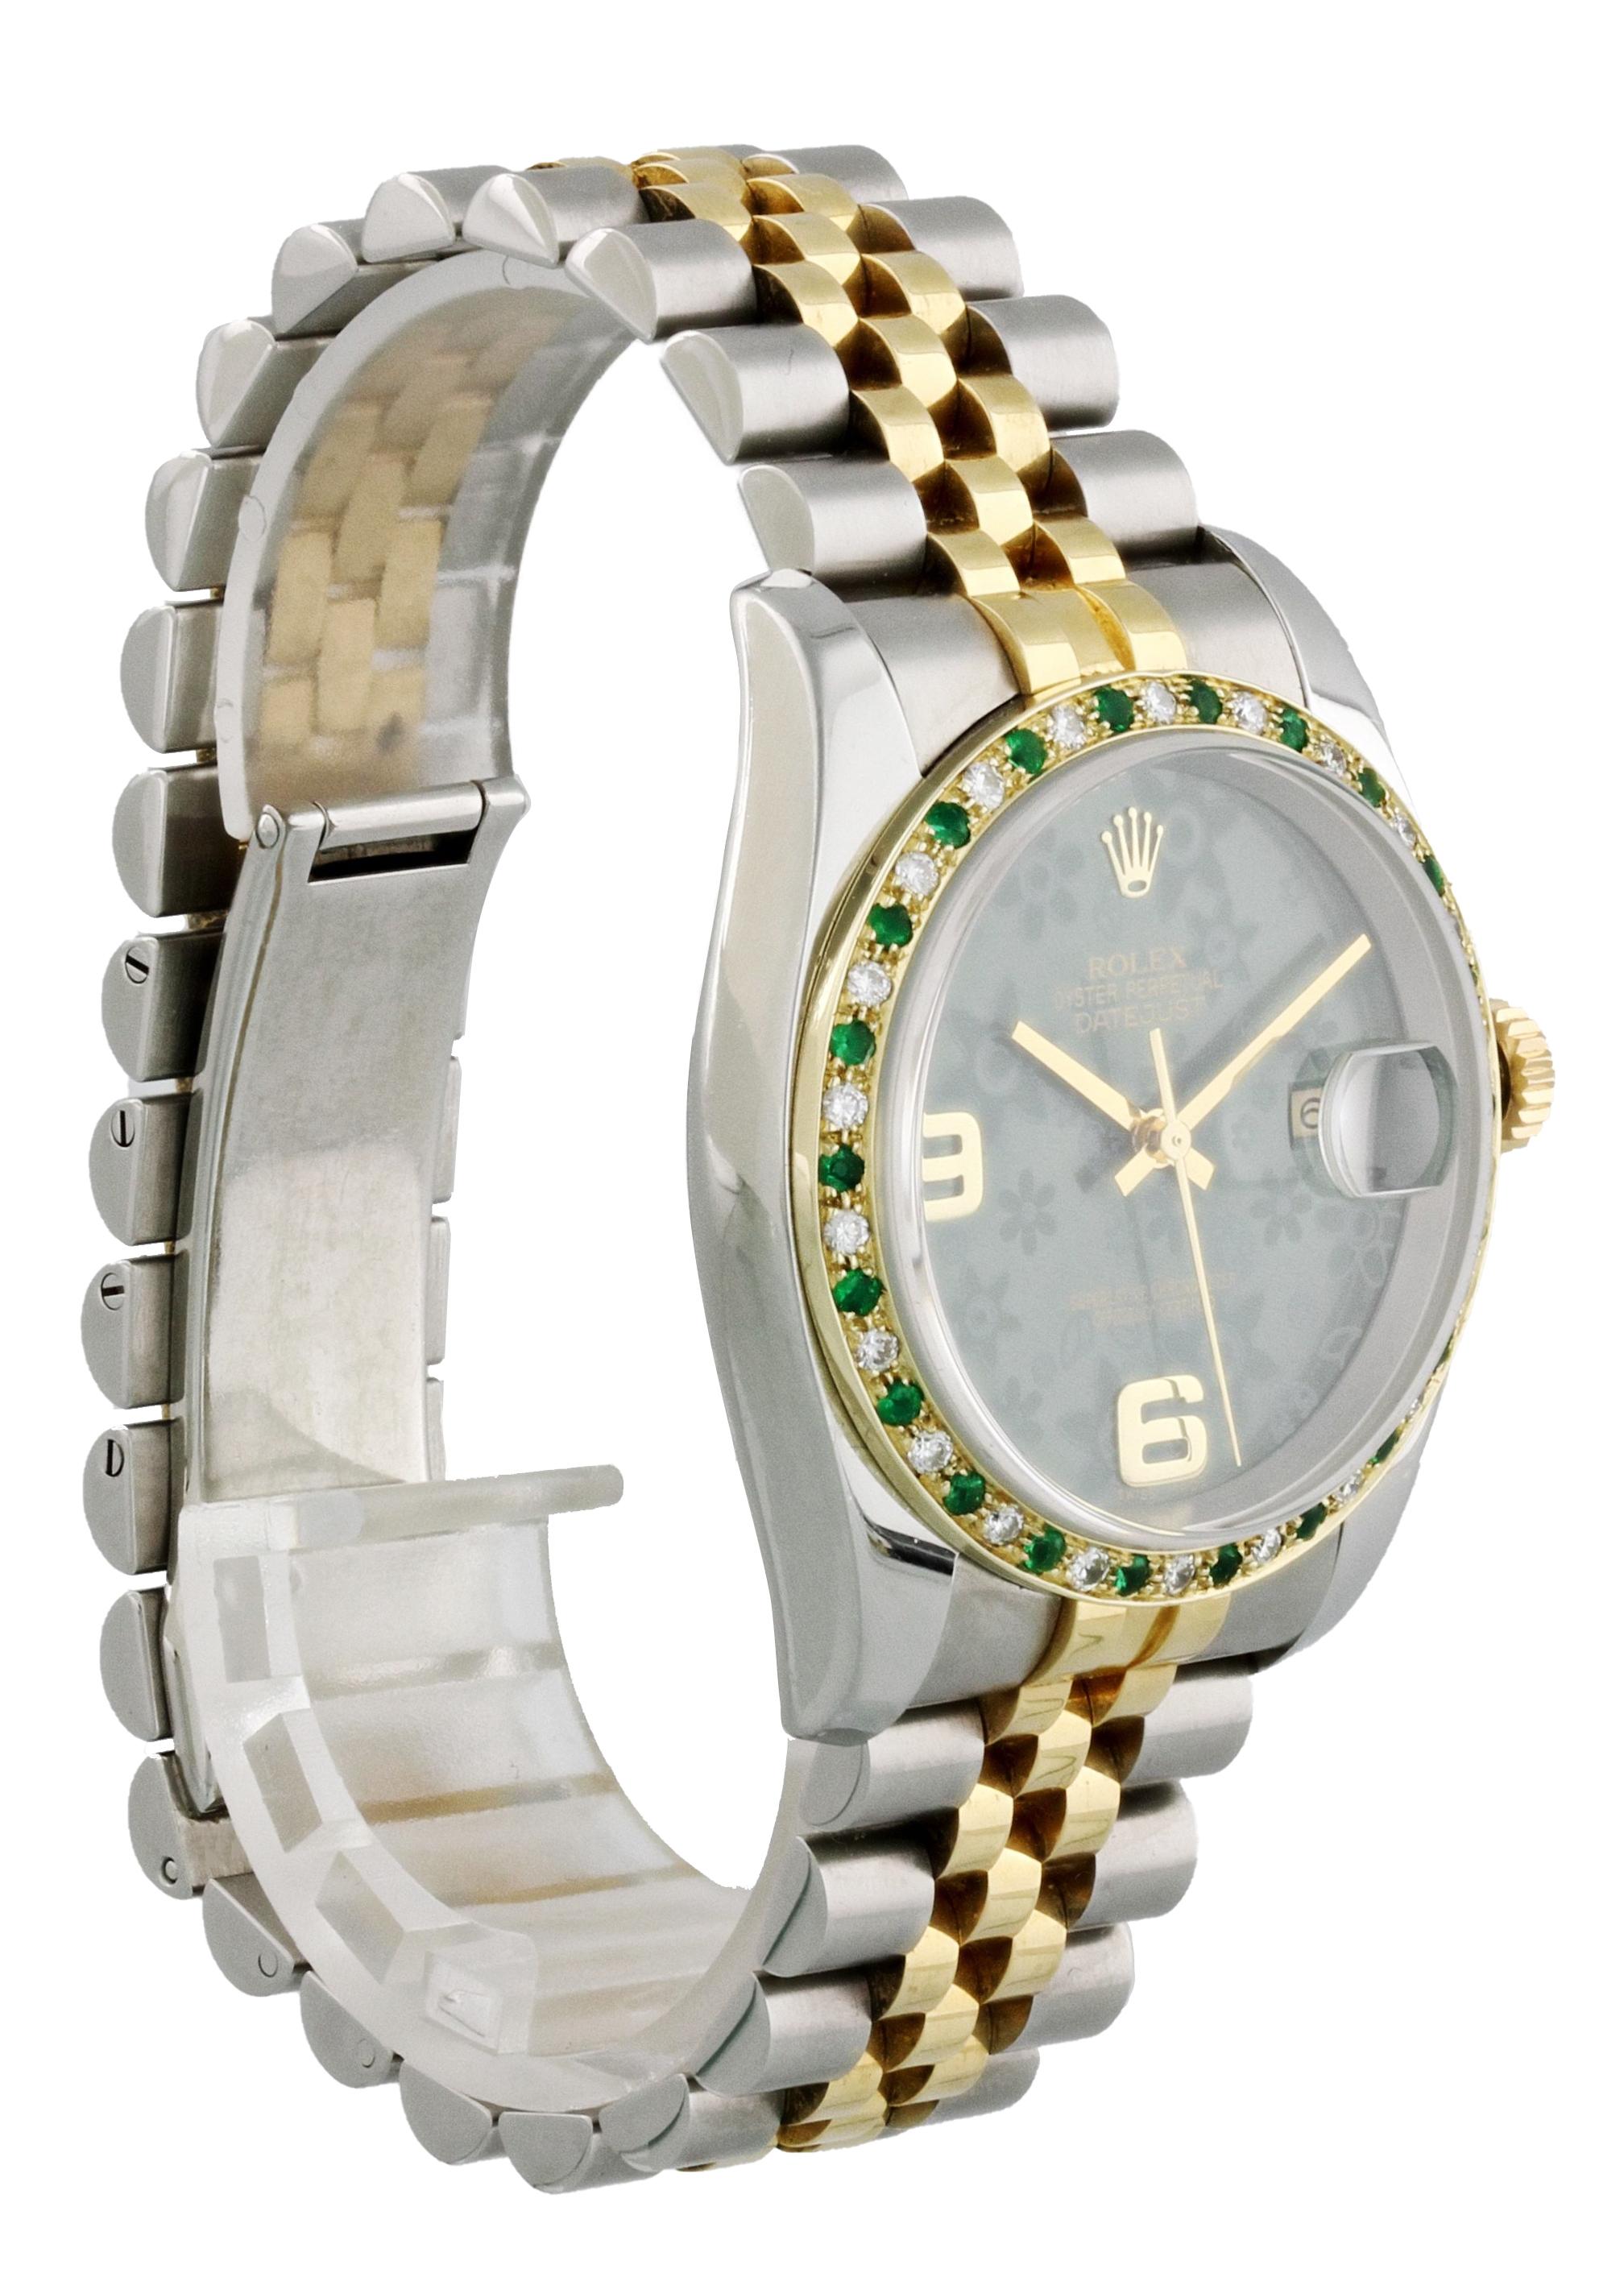 Rolex Datejust 116233 Green Floral Dial Diamond Bezel Men's Watch In Excellent Condition For Sale In New York, NY